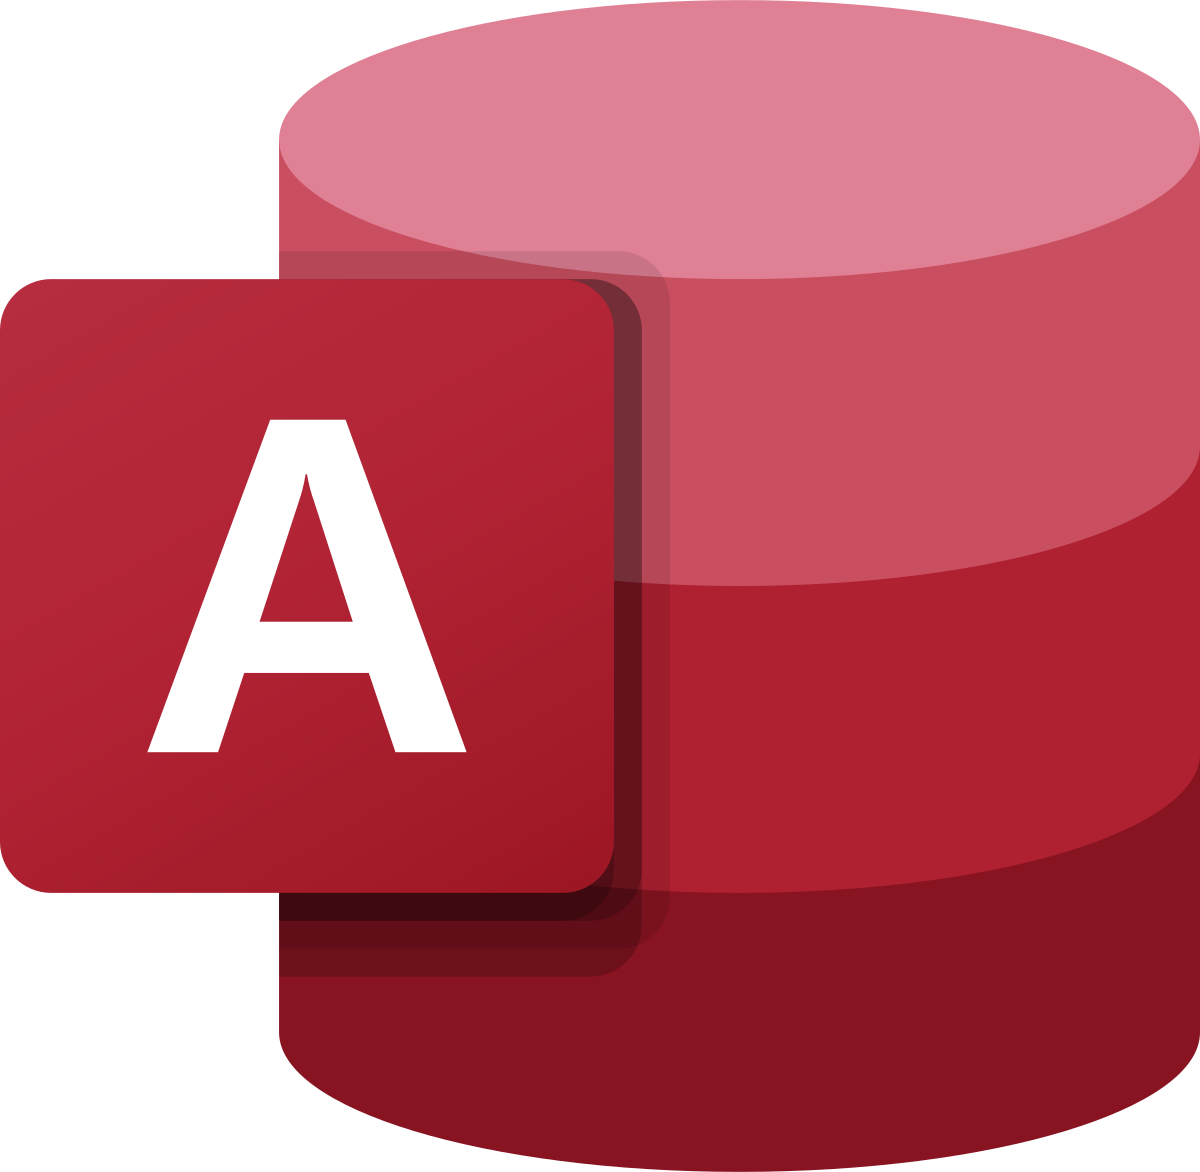 microsoft access 2016 free download for mac